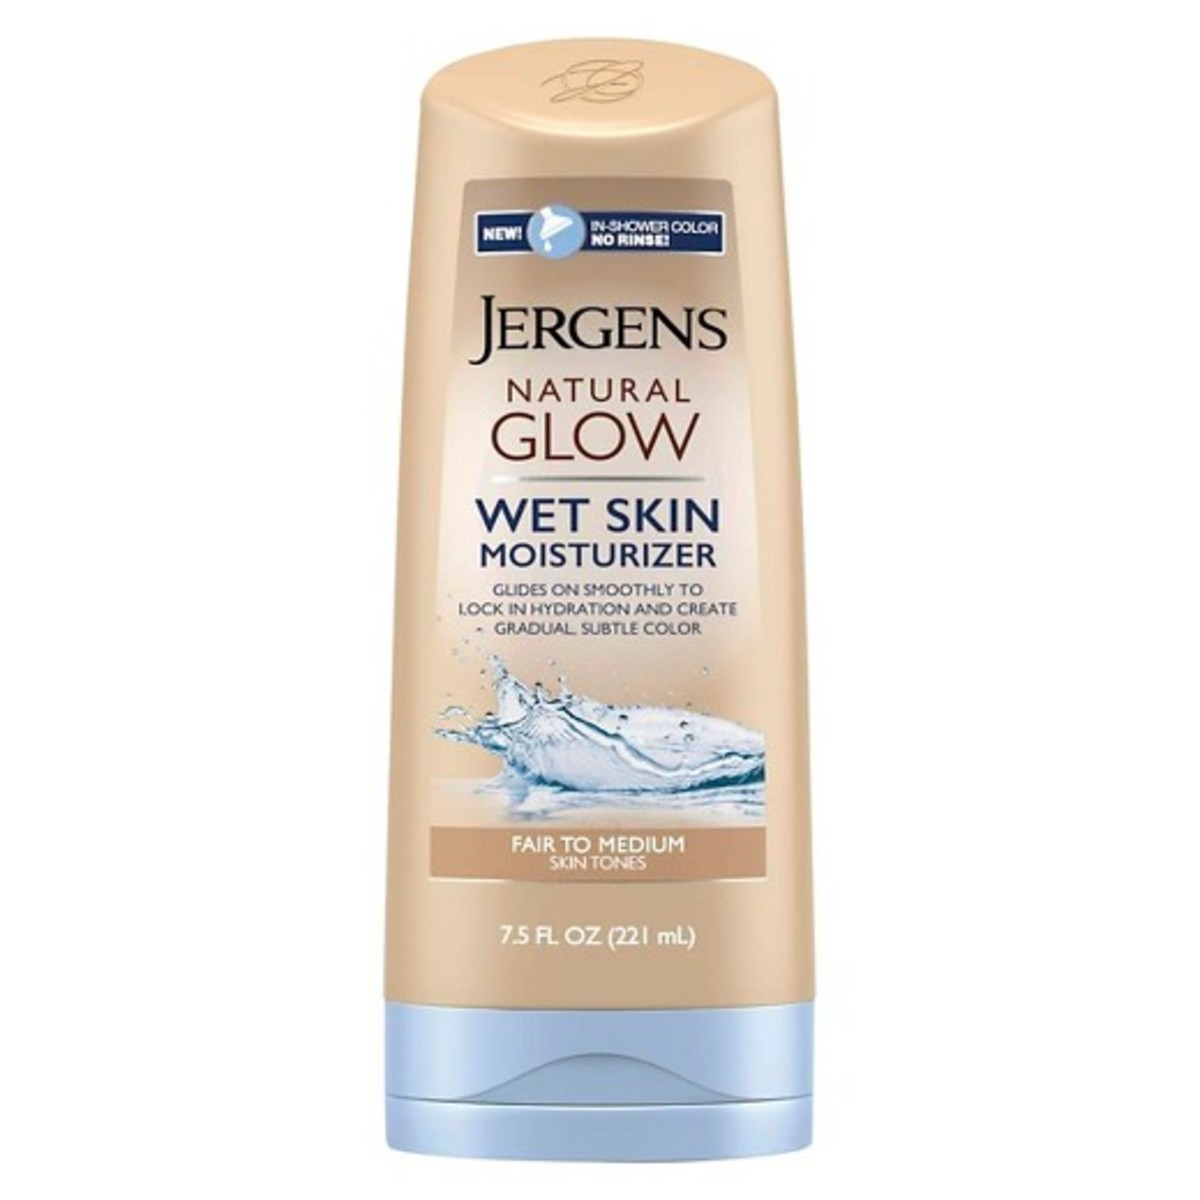 Jergens Natural Glow Wet Skin Moisturizer, $8.69, available at Target.